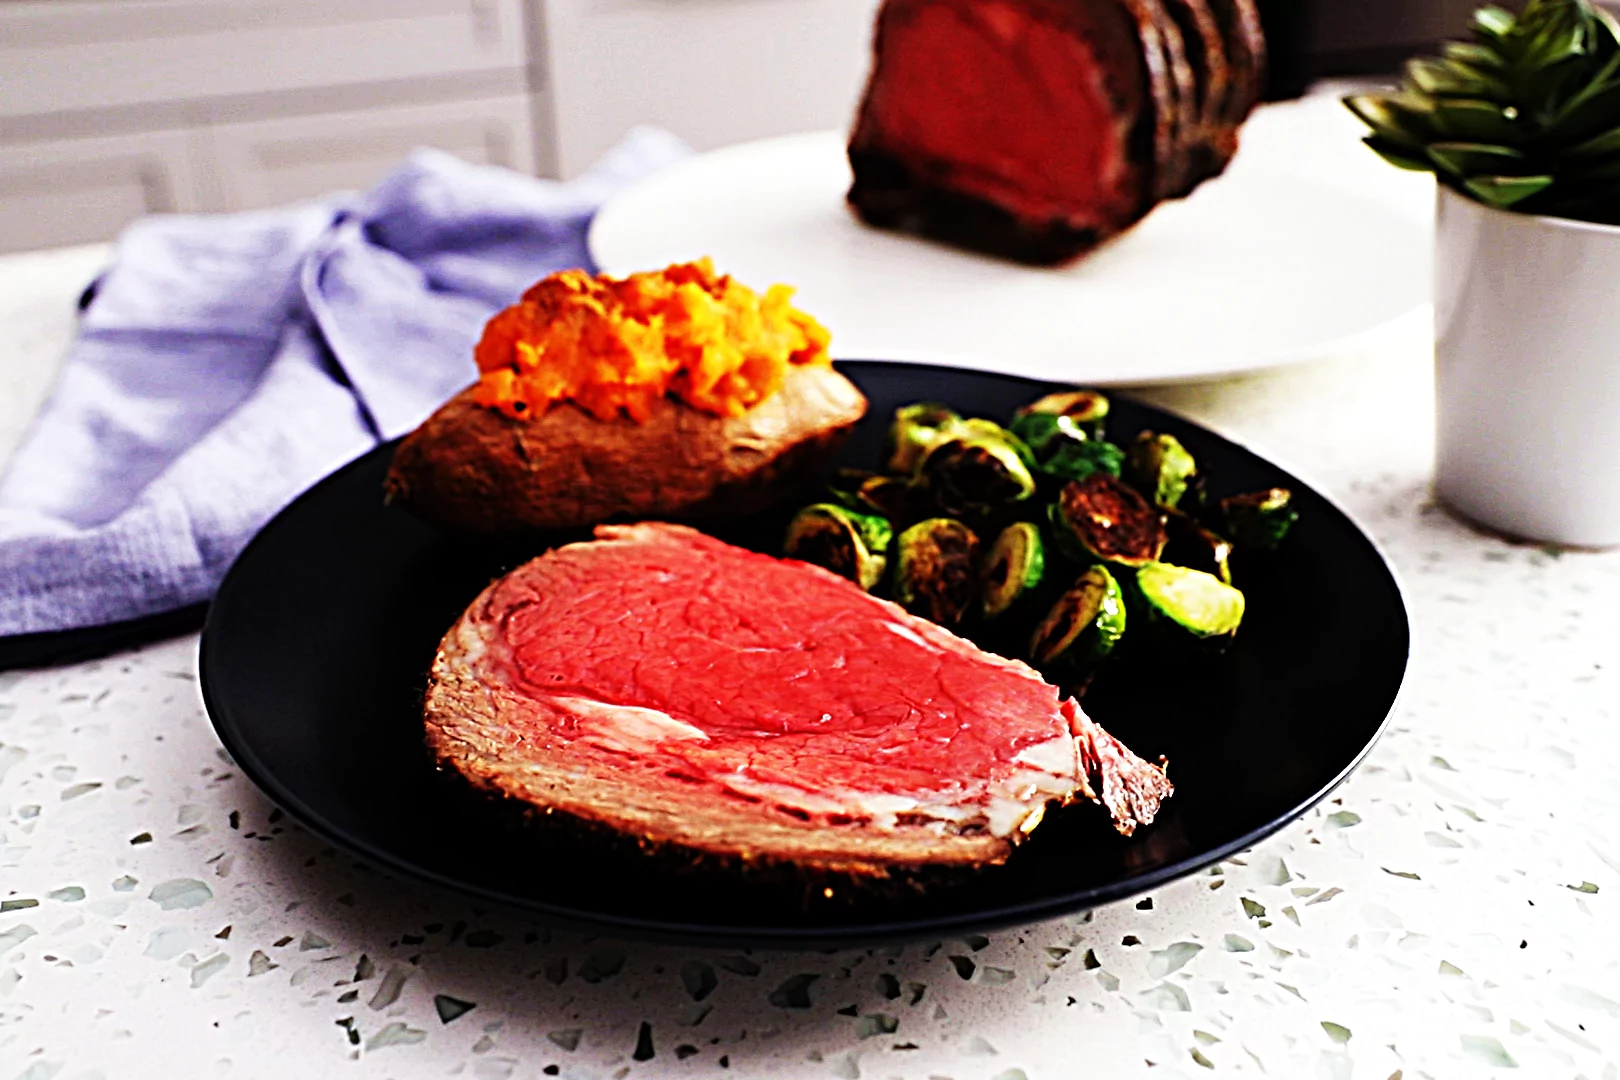 Stupid-Easy Recipe for Easy 4-Ingredient Prime Rib (#1 Top-Rated)